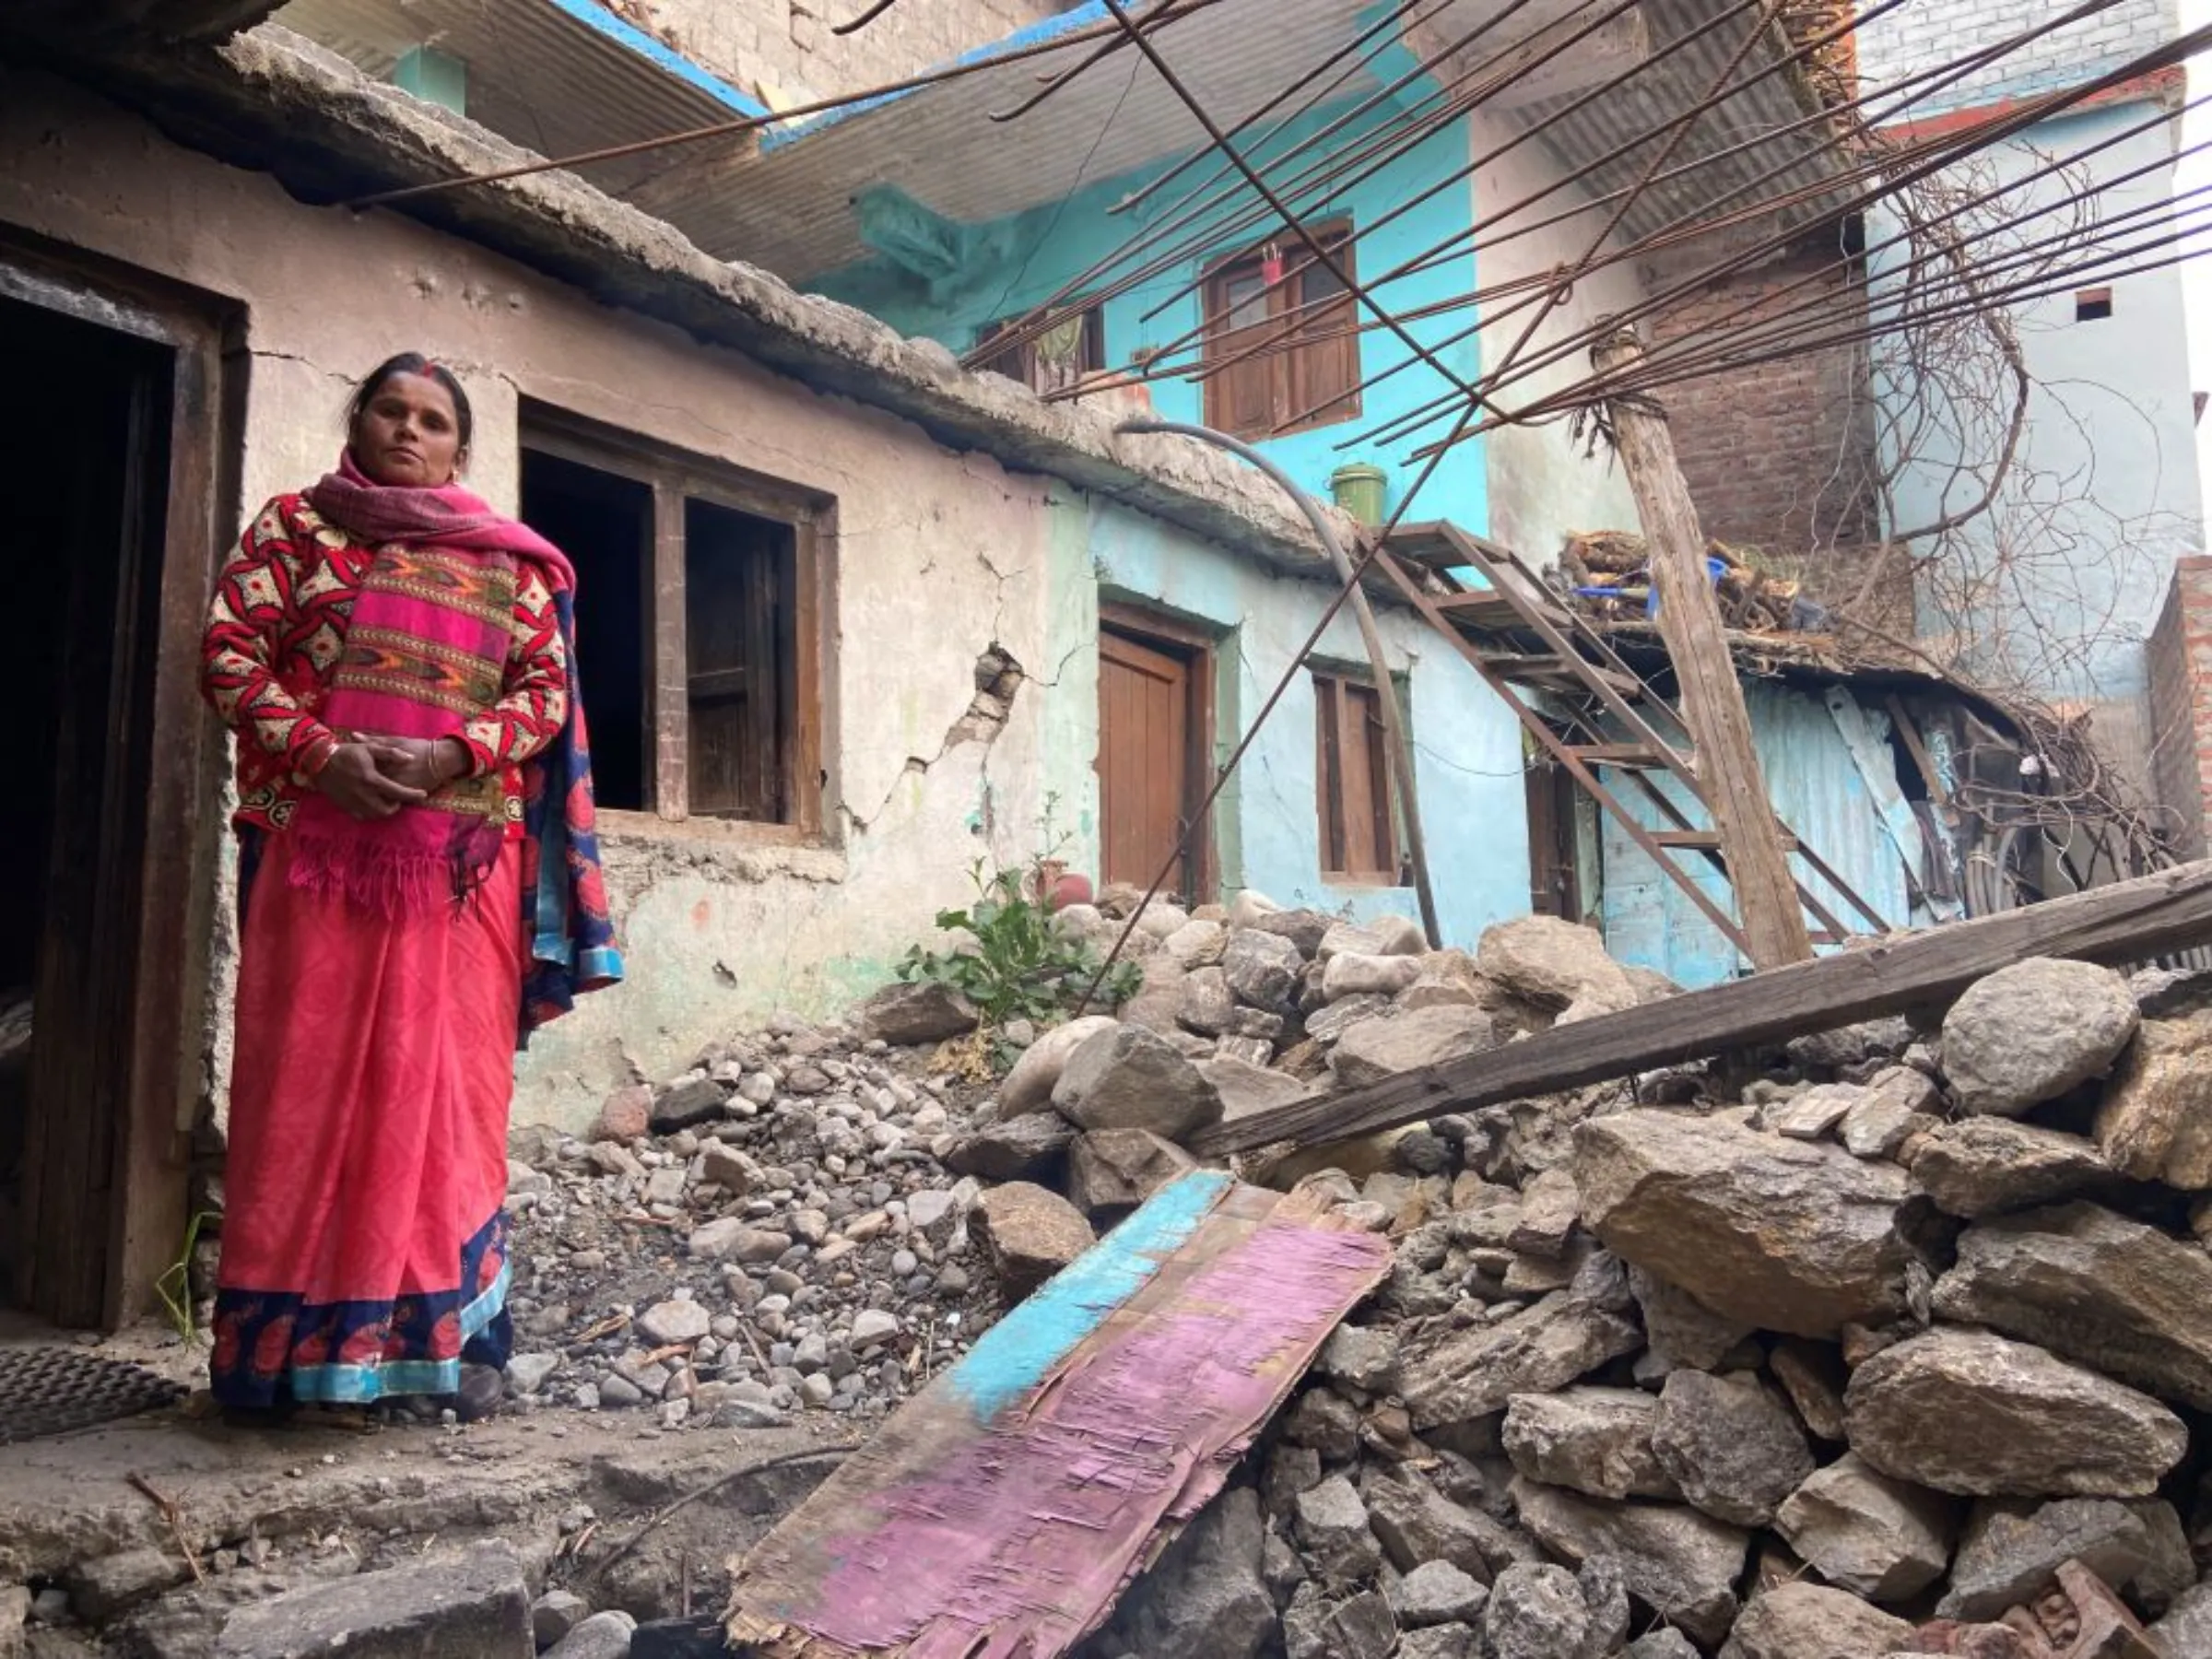 Shashi Devi poses for a picture in front of her house that developed cracks last year in the Himalayan town of Joshimath, India, January 12, 2023